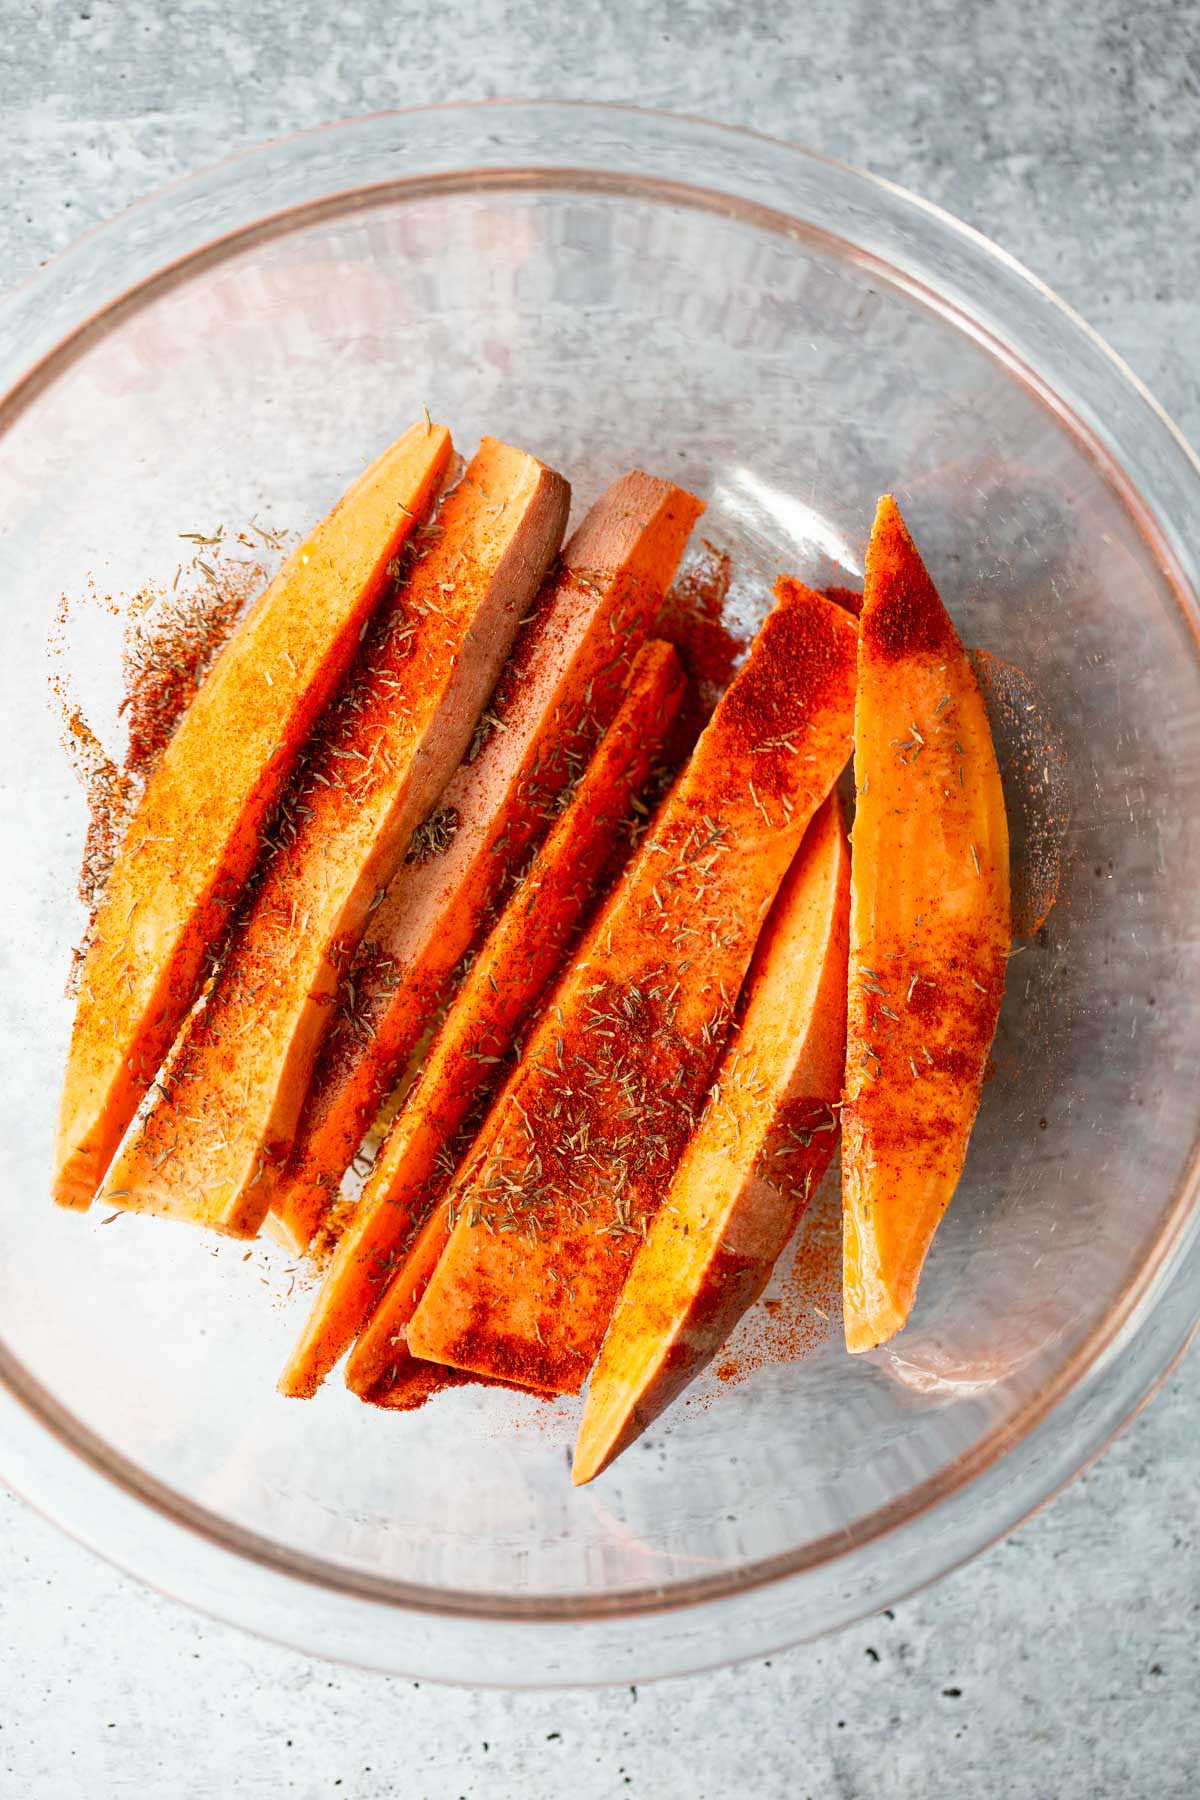 Sweet potato wedges with seasonings in a bowl.